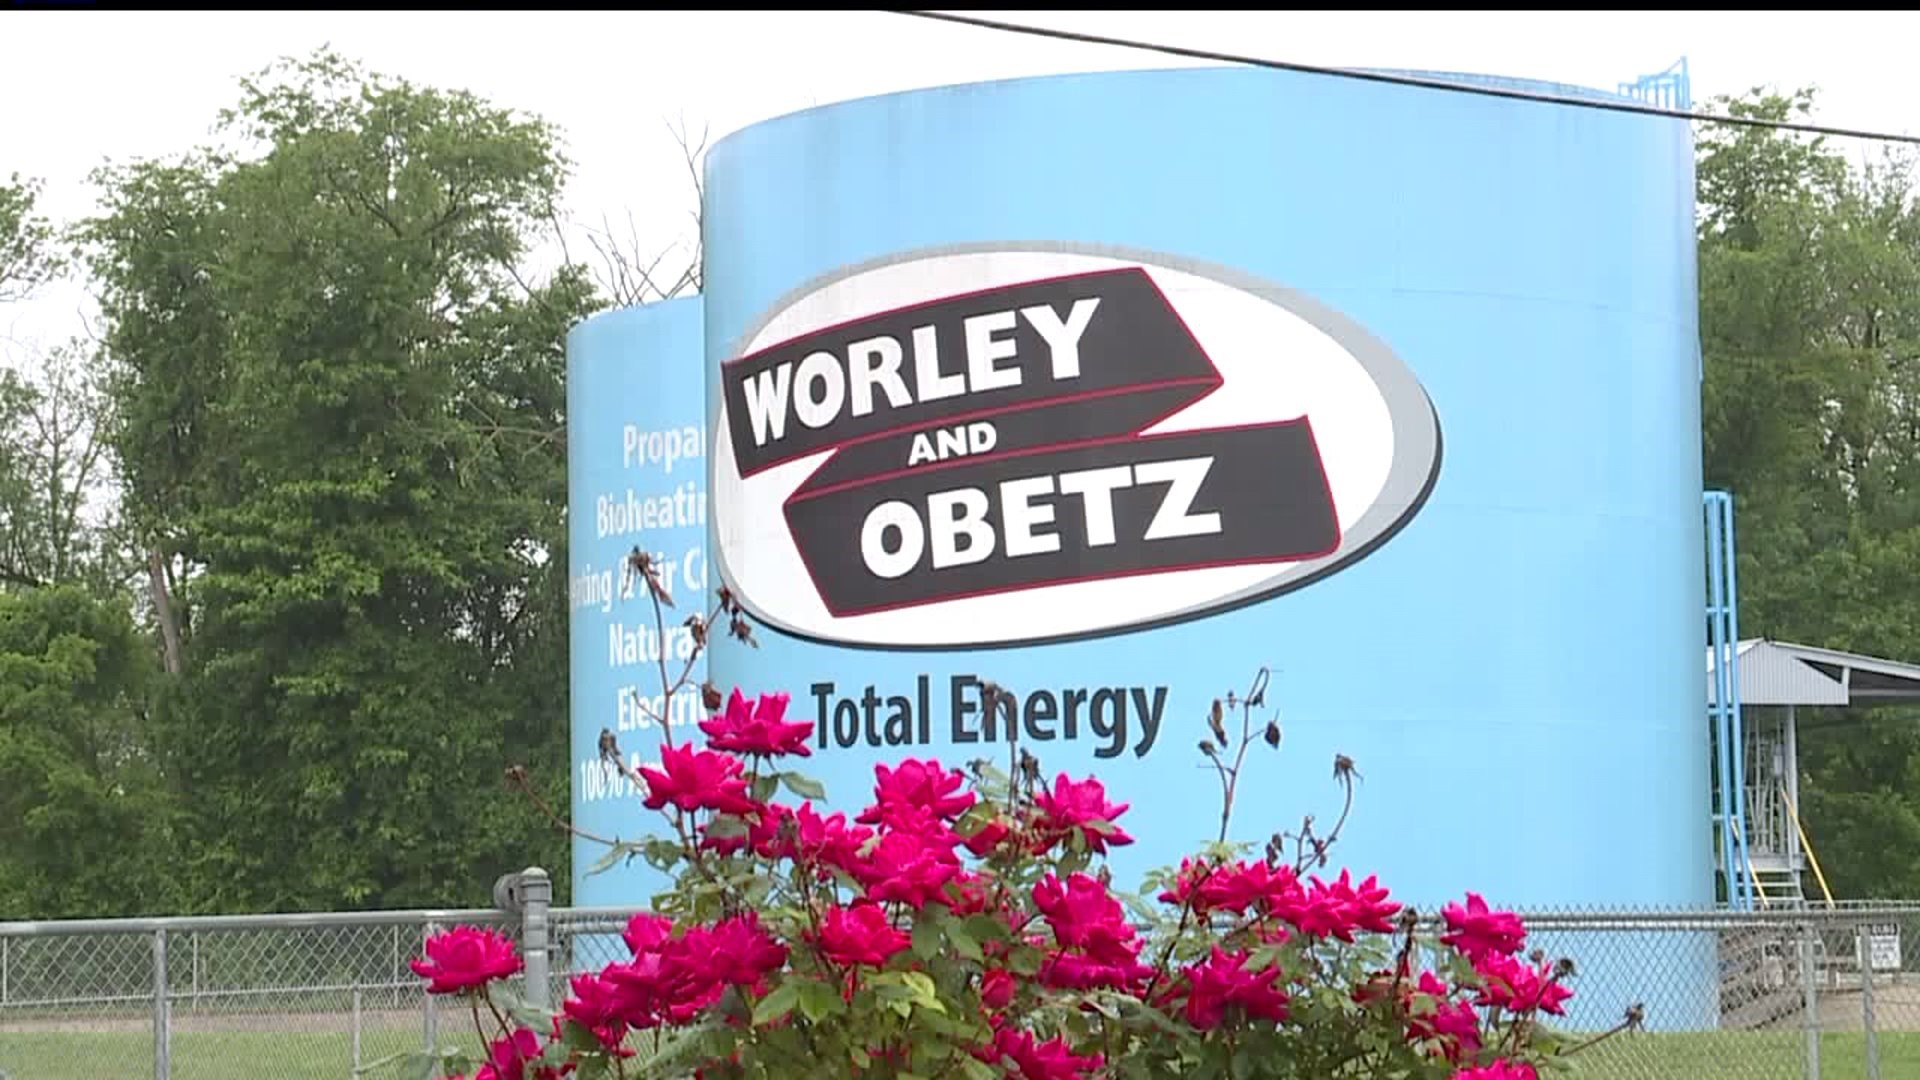 Worley and Obetz abruptly Closes